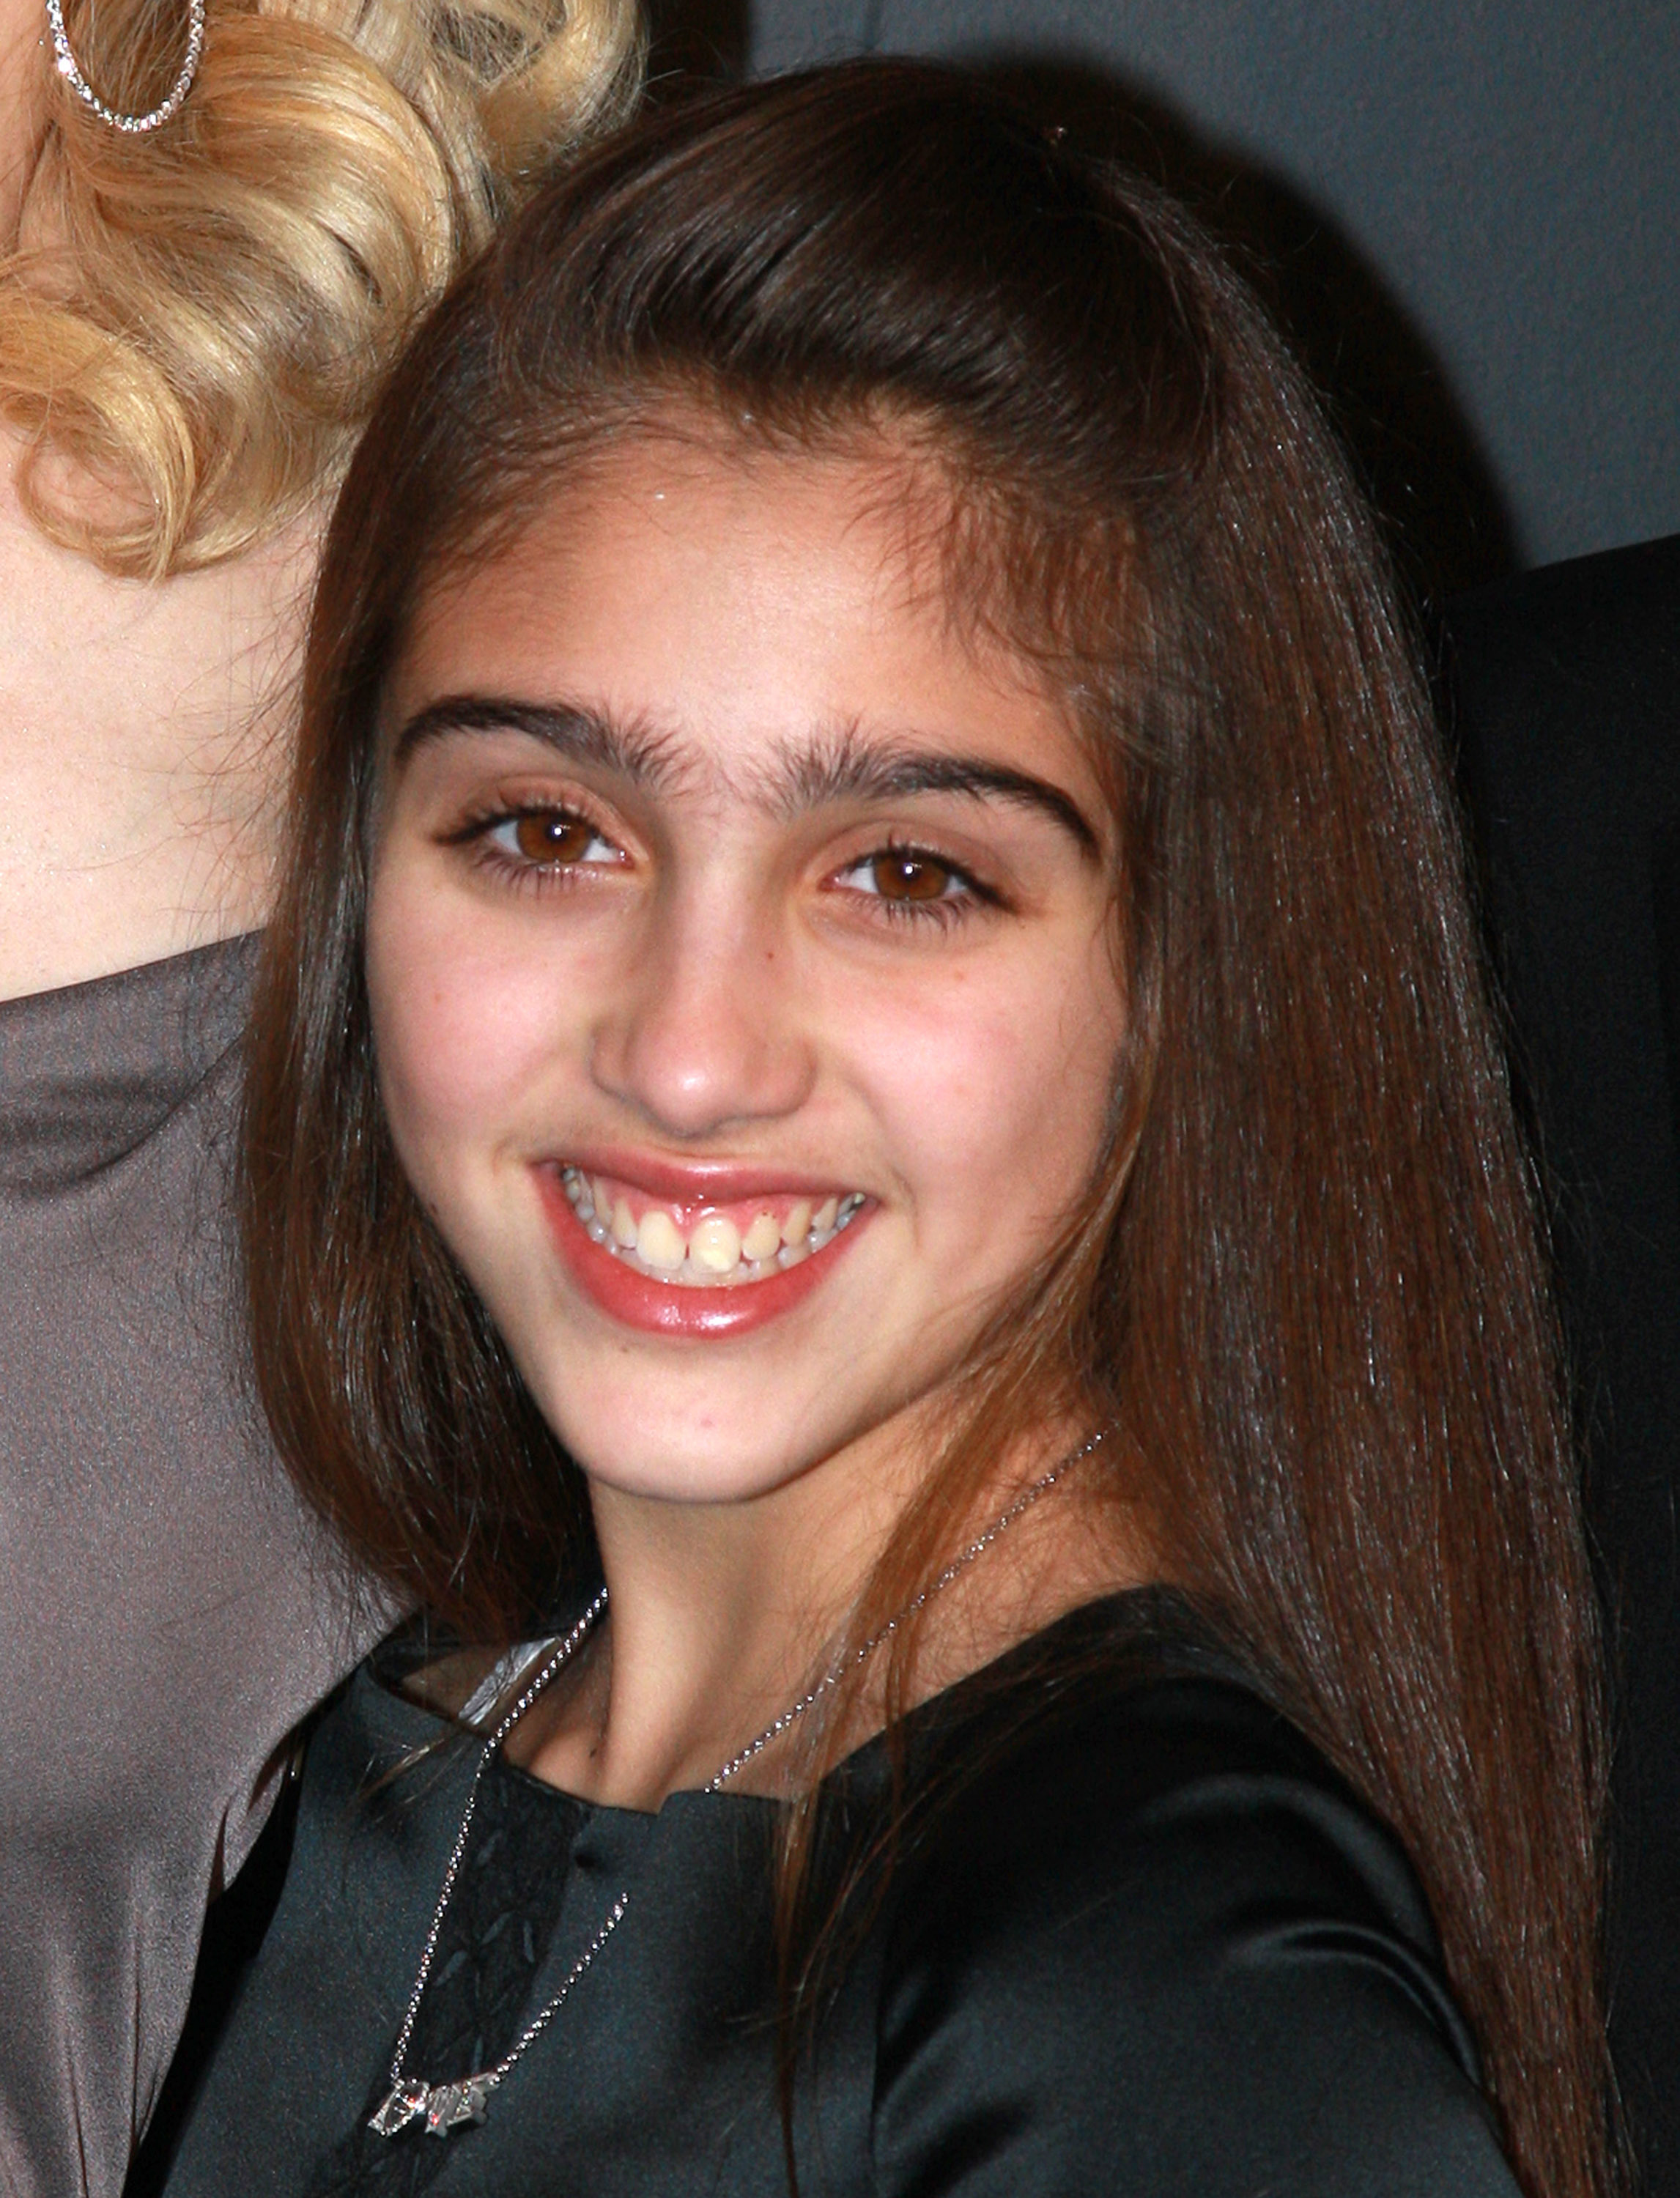 Madonna's daughter Lourdes "Lola" Leon on February 6, 2008 in New York City | Source: Getty Images